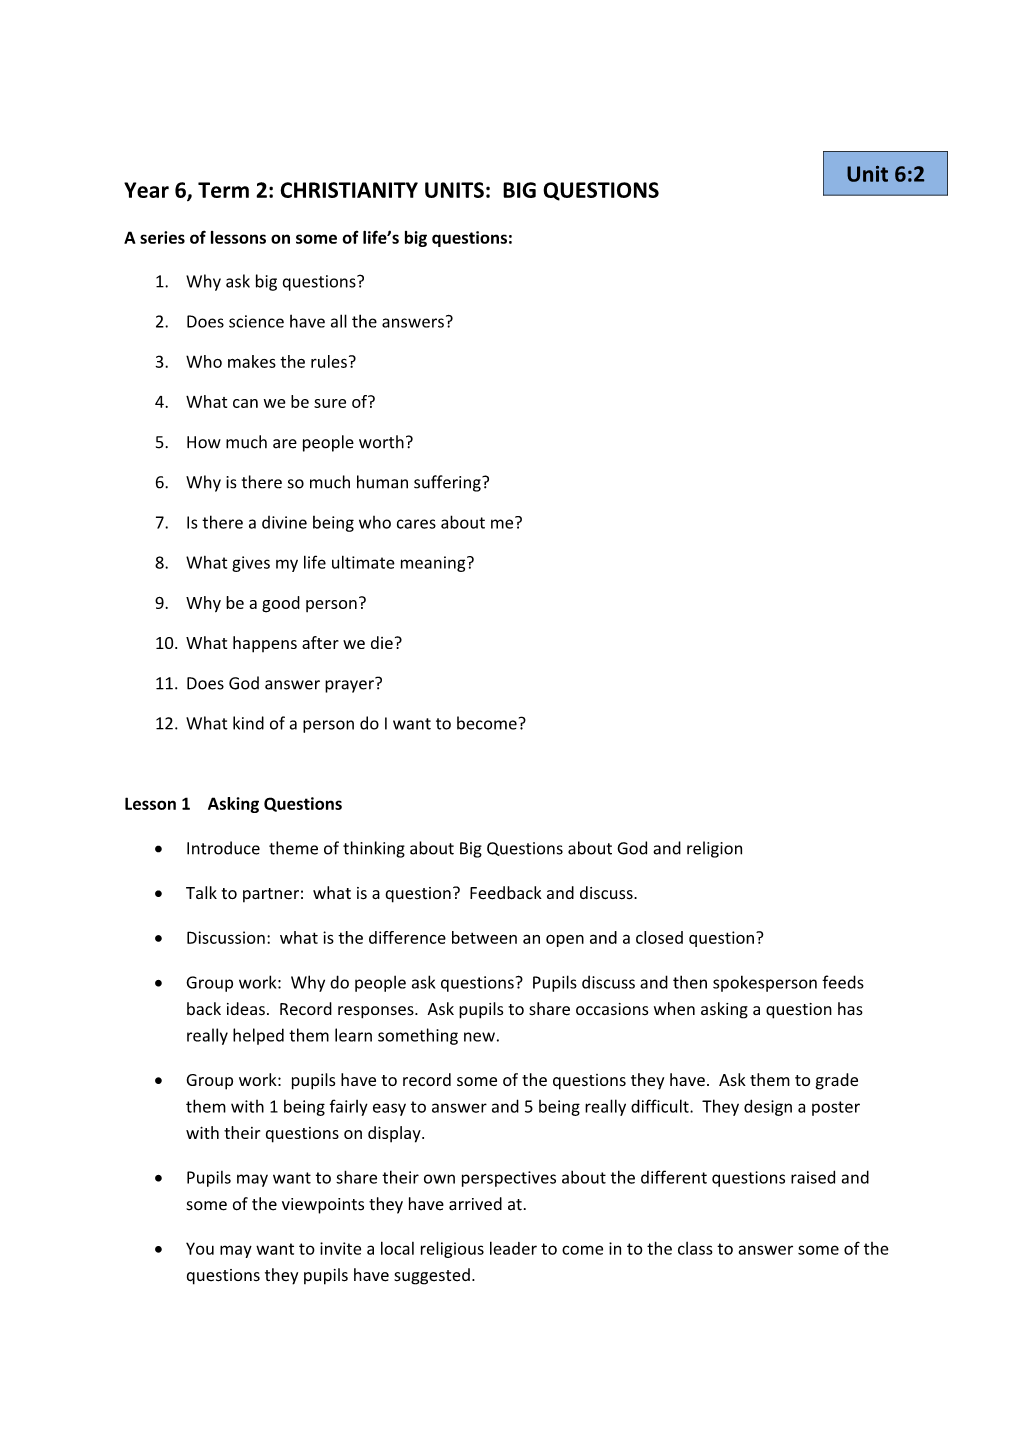 CHRISTIANITY UNITS: BIG QUESTIONS (Year 6)